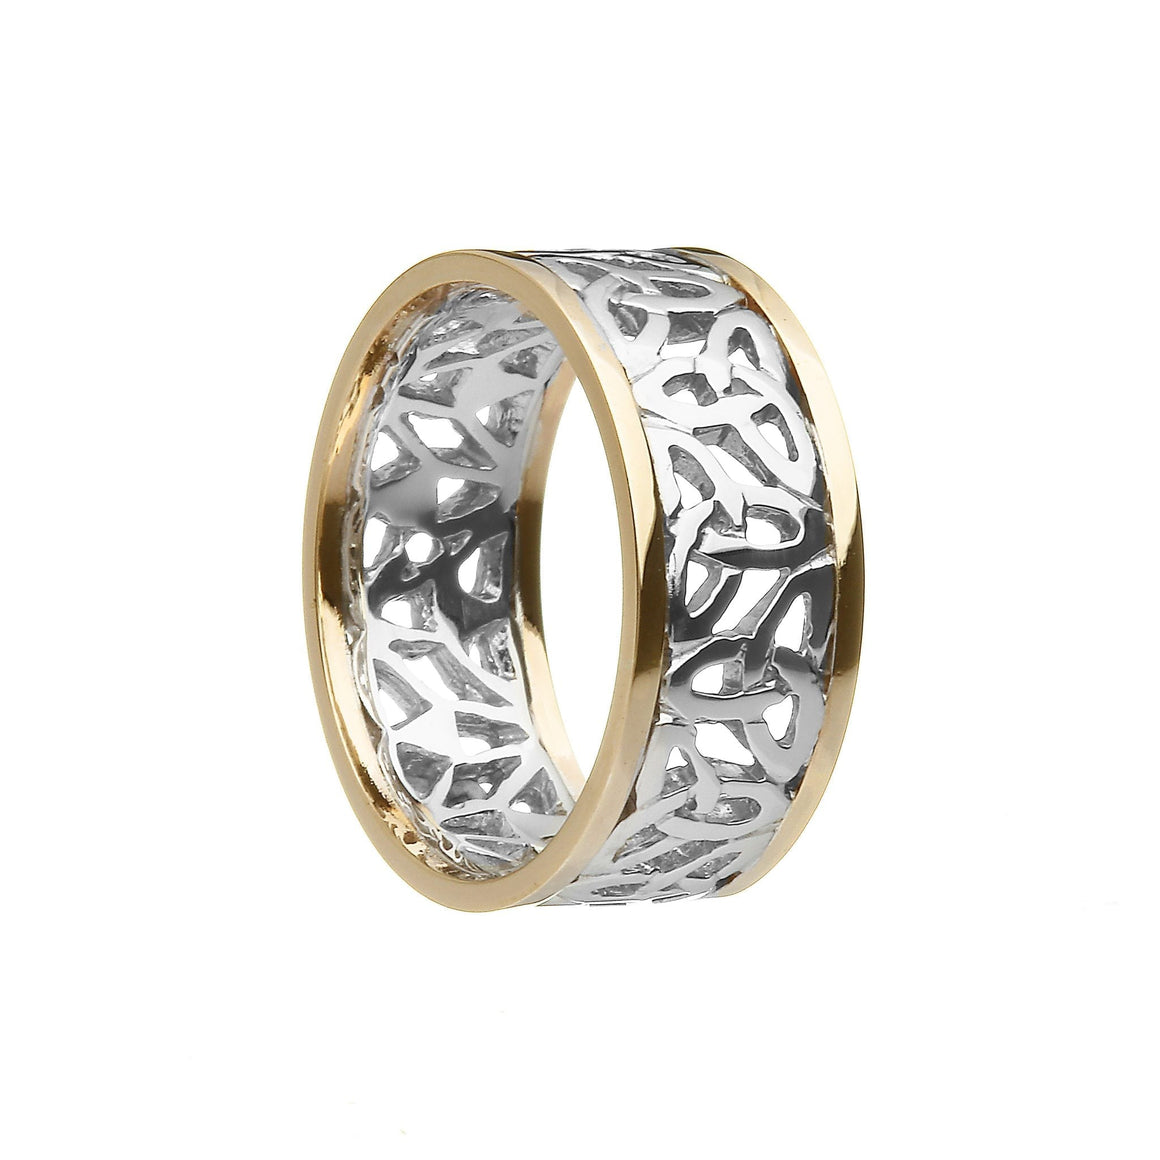 Men's Trinity Knot Filigree Wedding Band with Yellow Gold Trims.